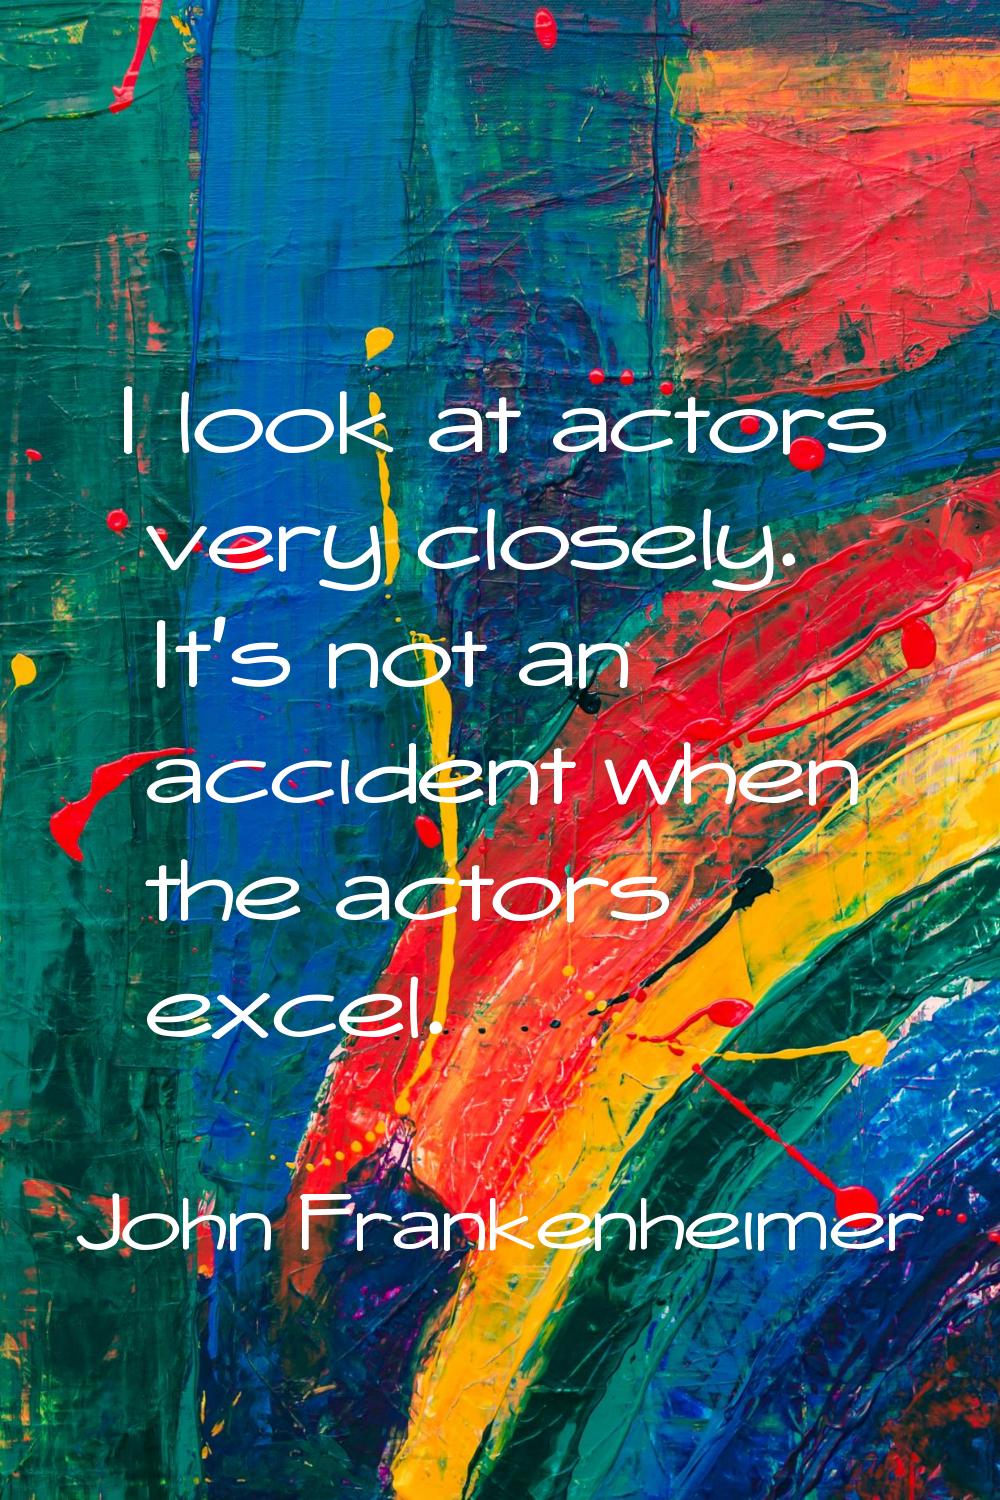 I look at actors very closely. It's not an accident when the actors excel.